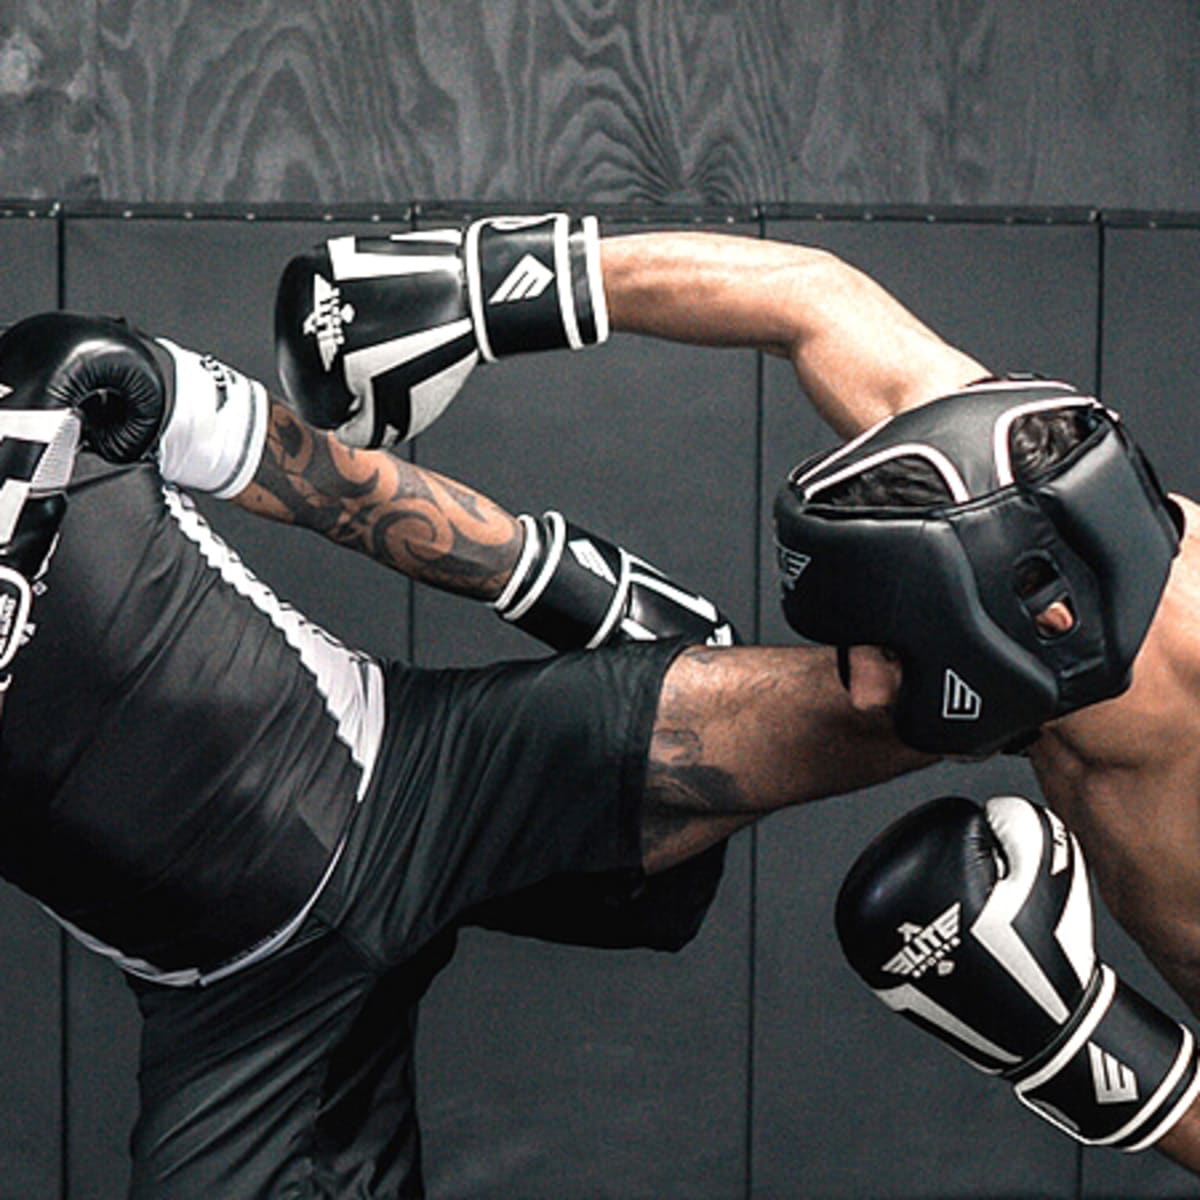 Best Competitive Fighting And MMA Training Gear At Elite, 55% OFF